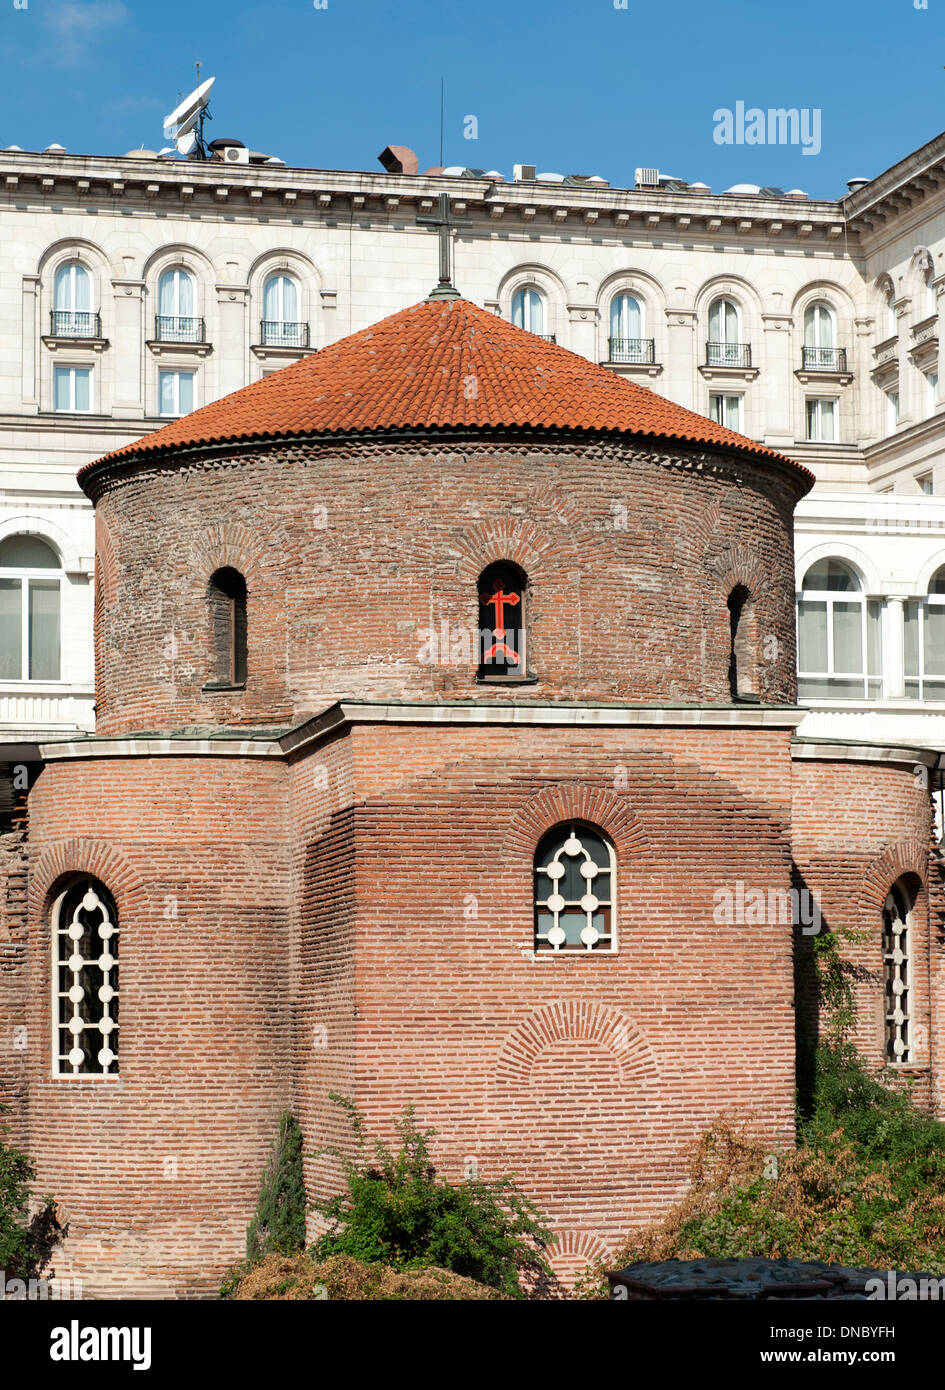 The Church of St George (the rotunda), considered the oldest building in Sofia, the capital of Bulgaria. Stock Photo